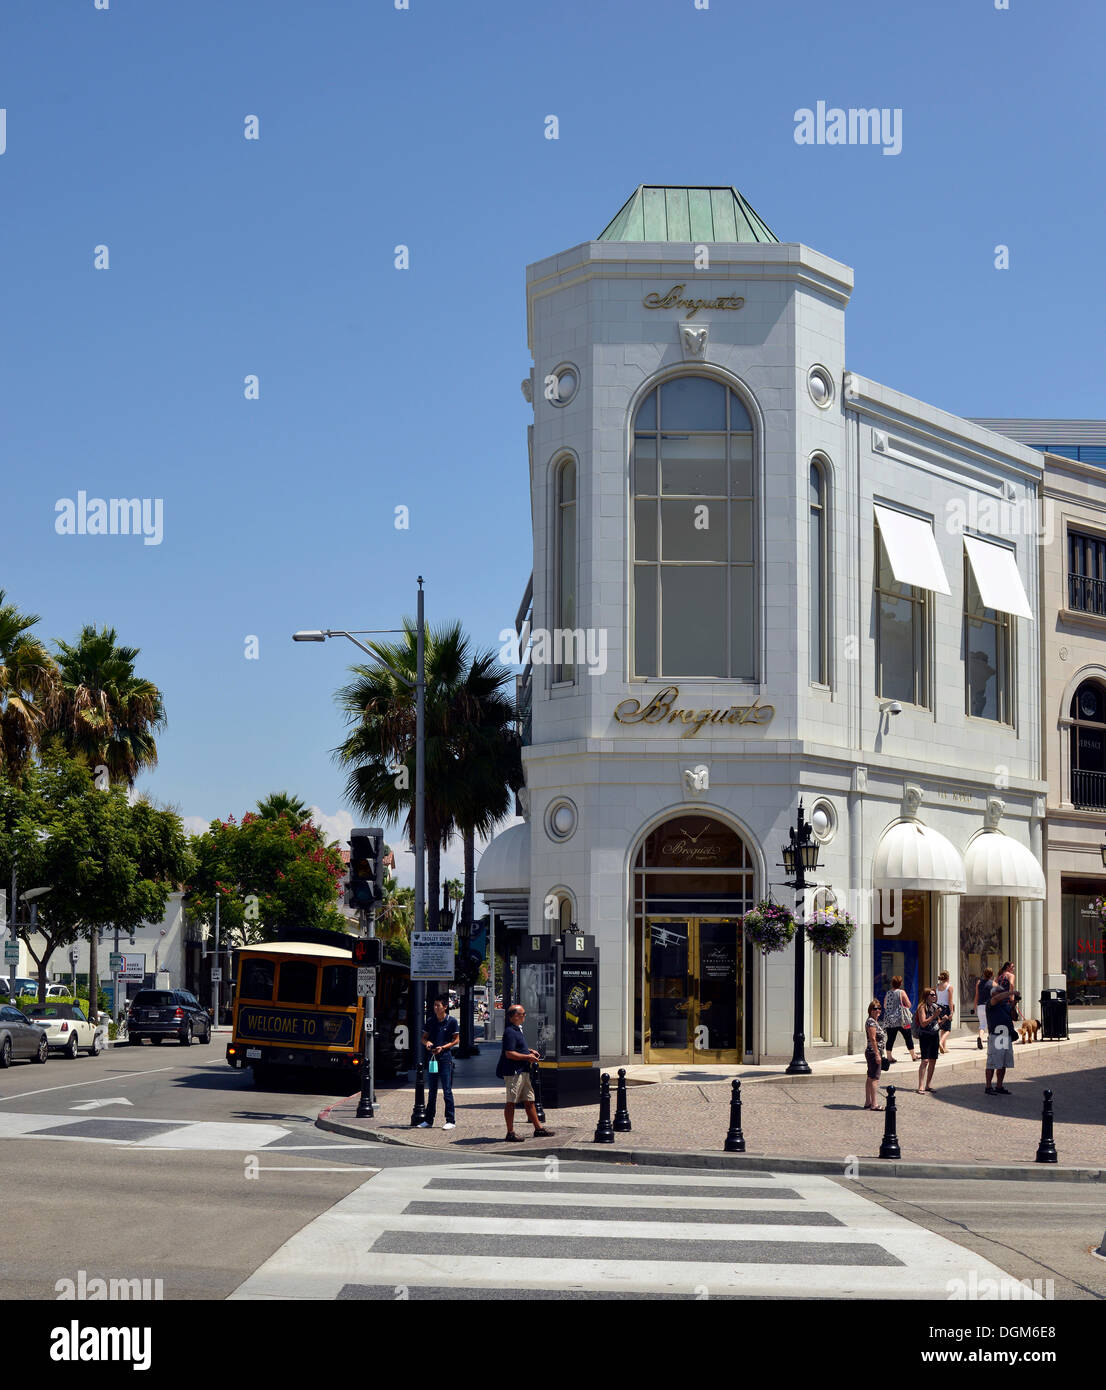 Two Rodeo Drive, Rodeo Drive luxury shopping street, Beverly Hills